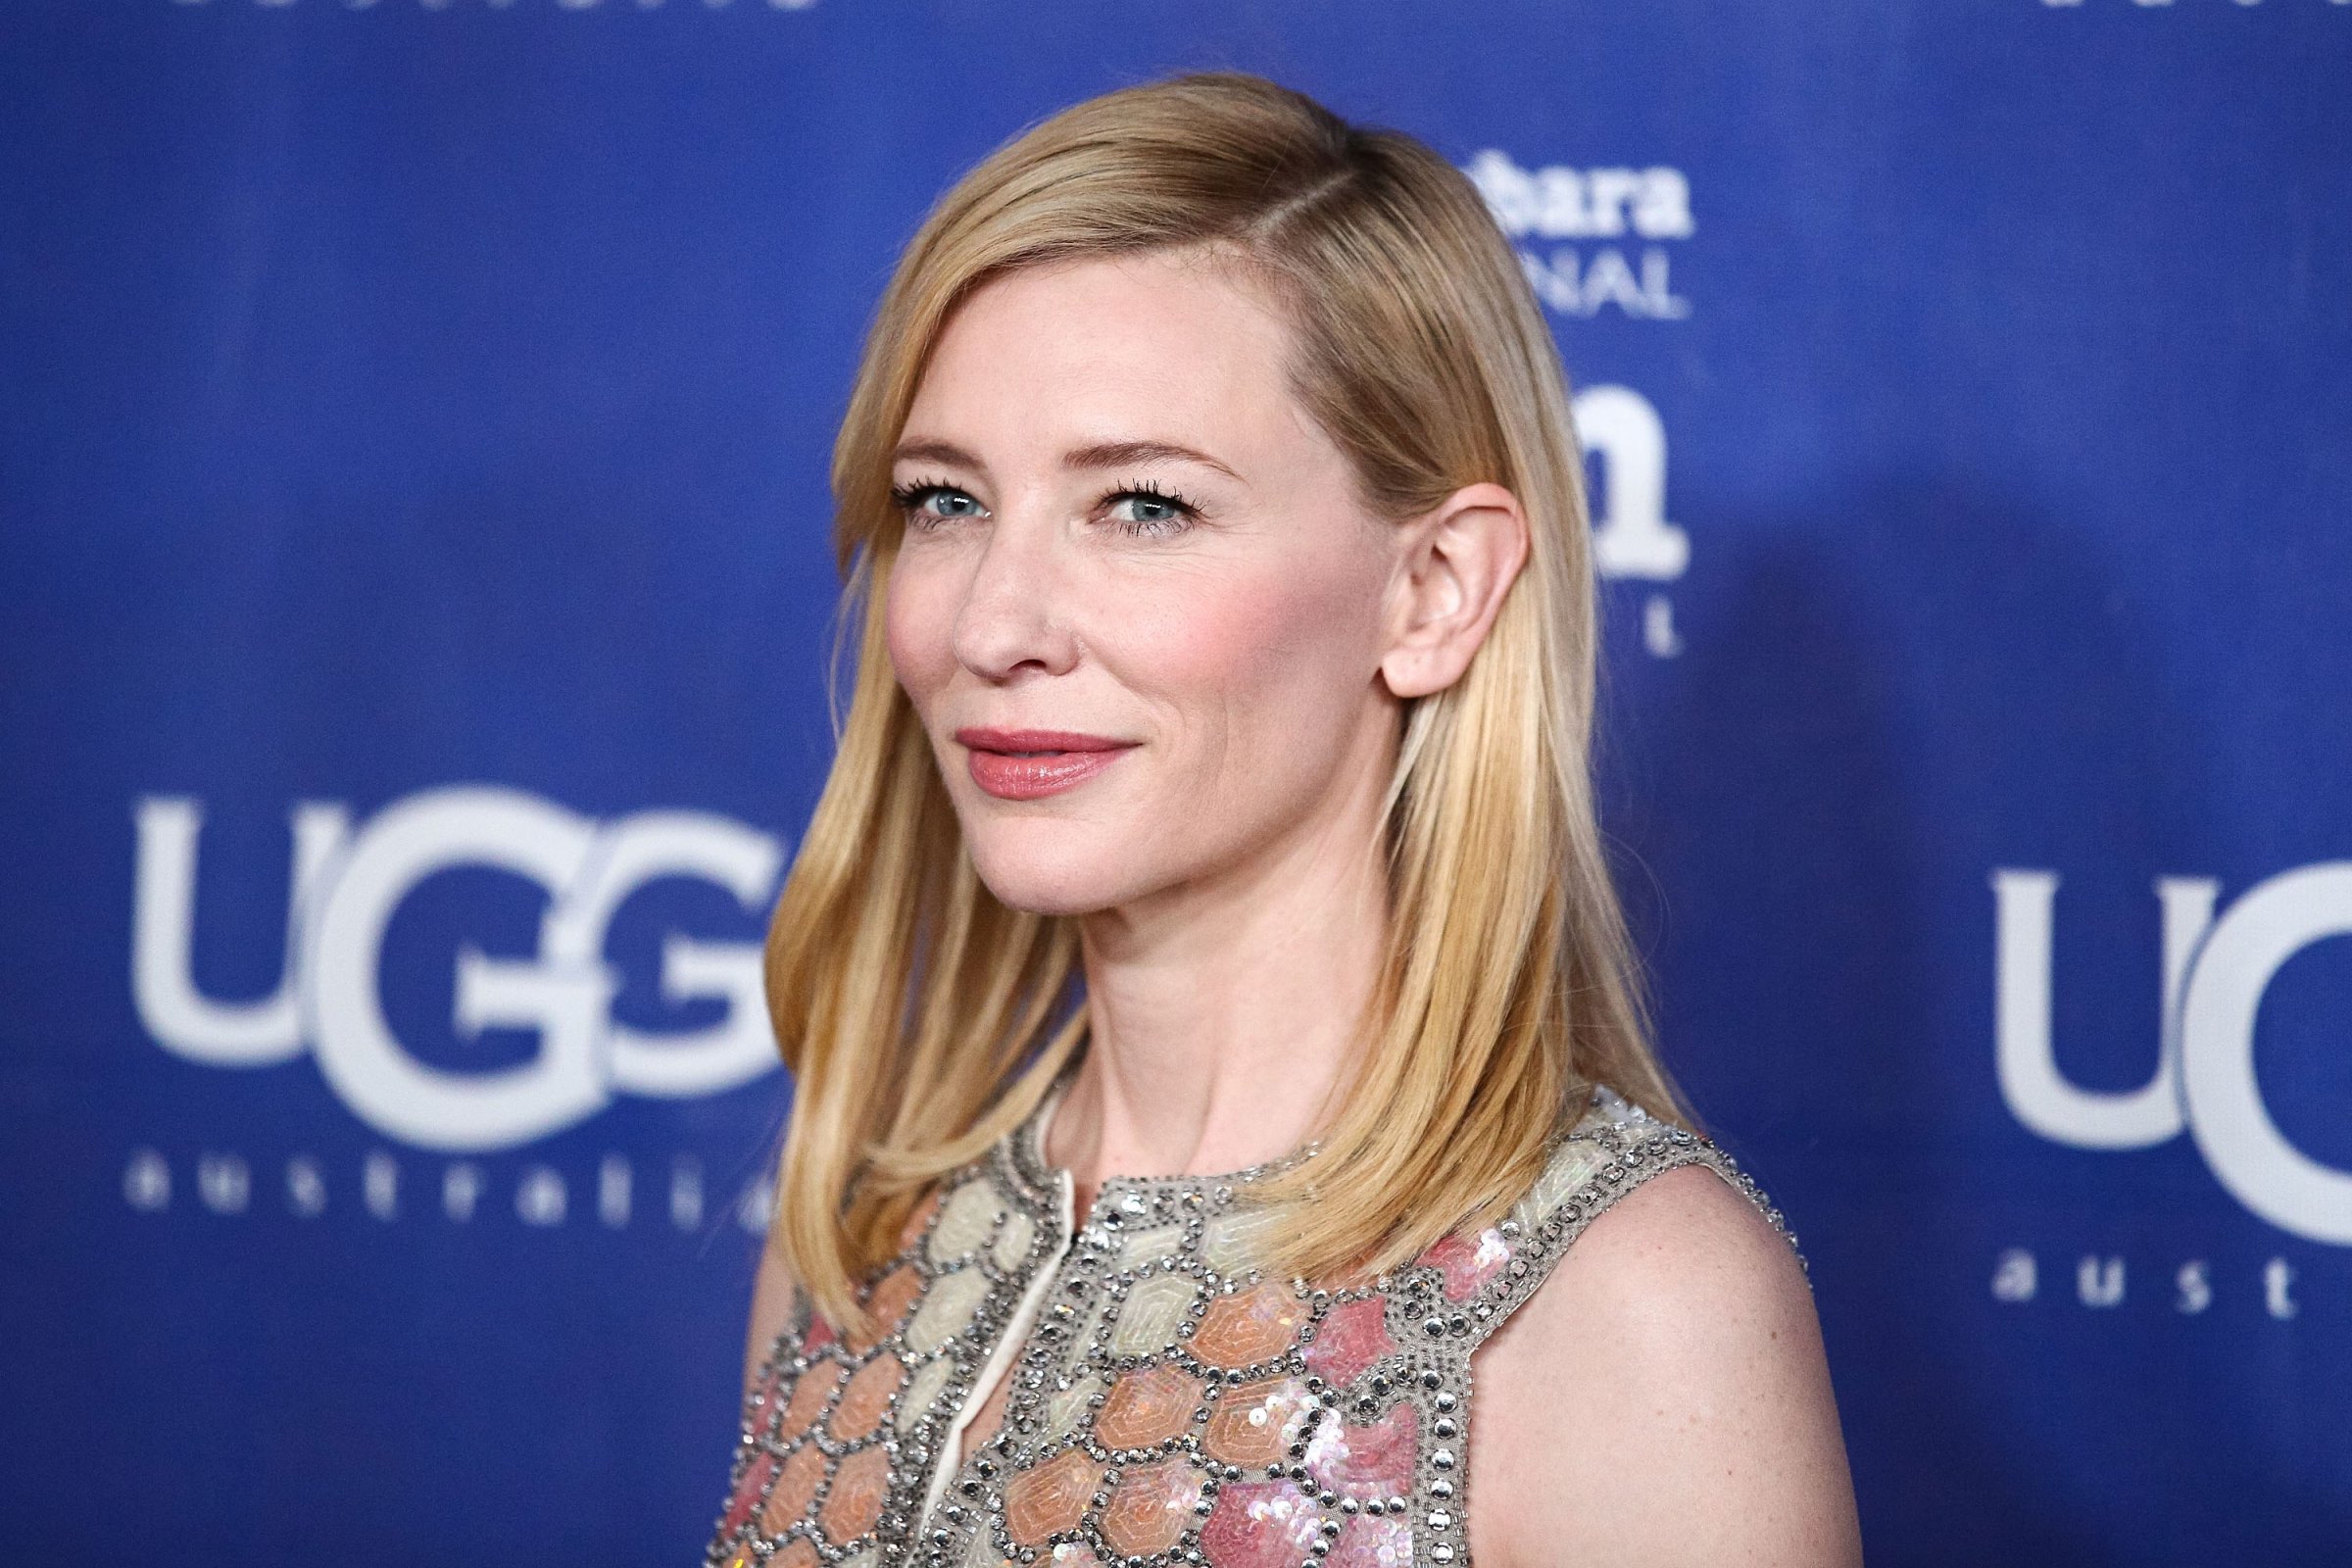 29th Santa Barbara International Film Festival - Cate Blanchett Honored With The Outstanding Performer Of The Year Award